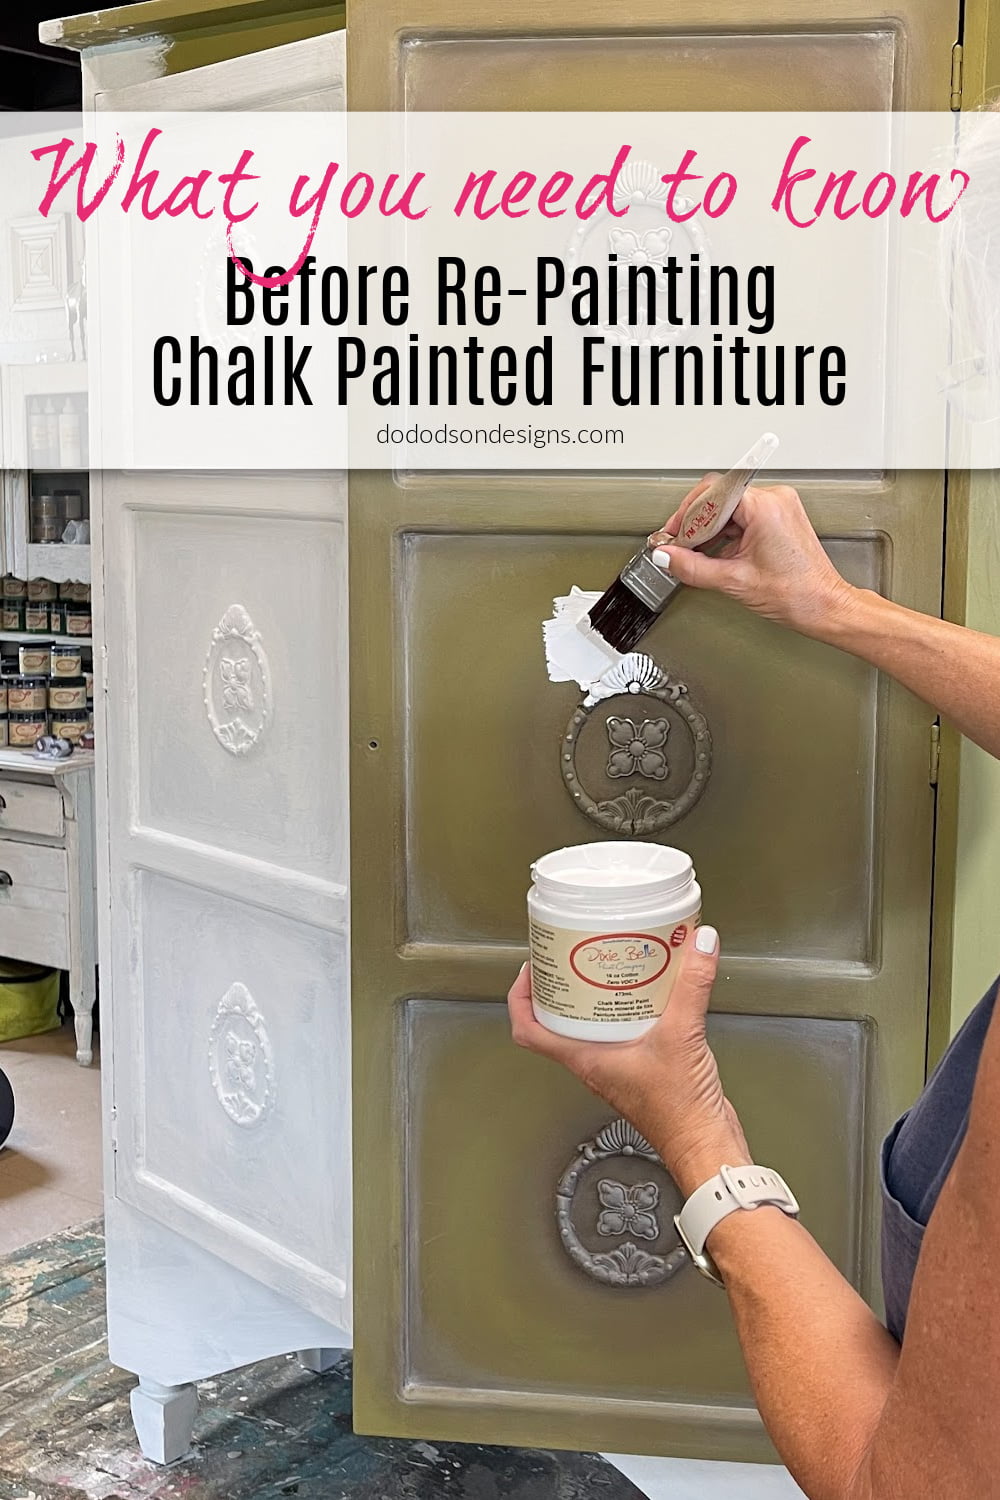 Before Repainting Chalk Painted Furniture - What You Need To Know!